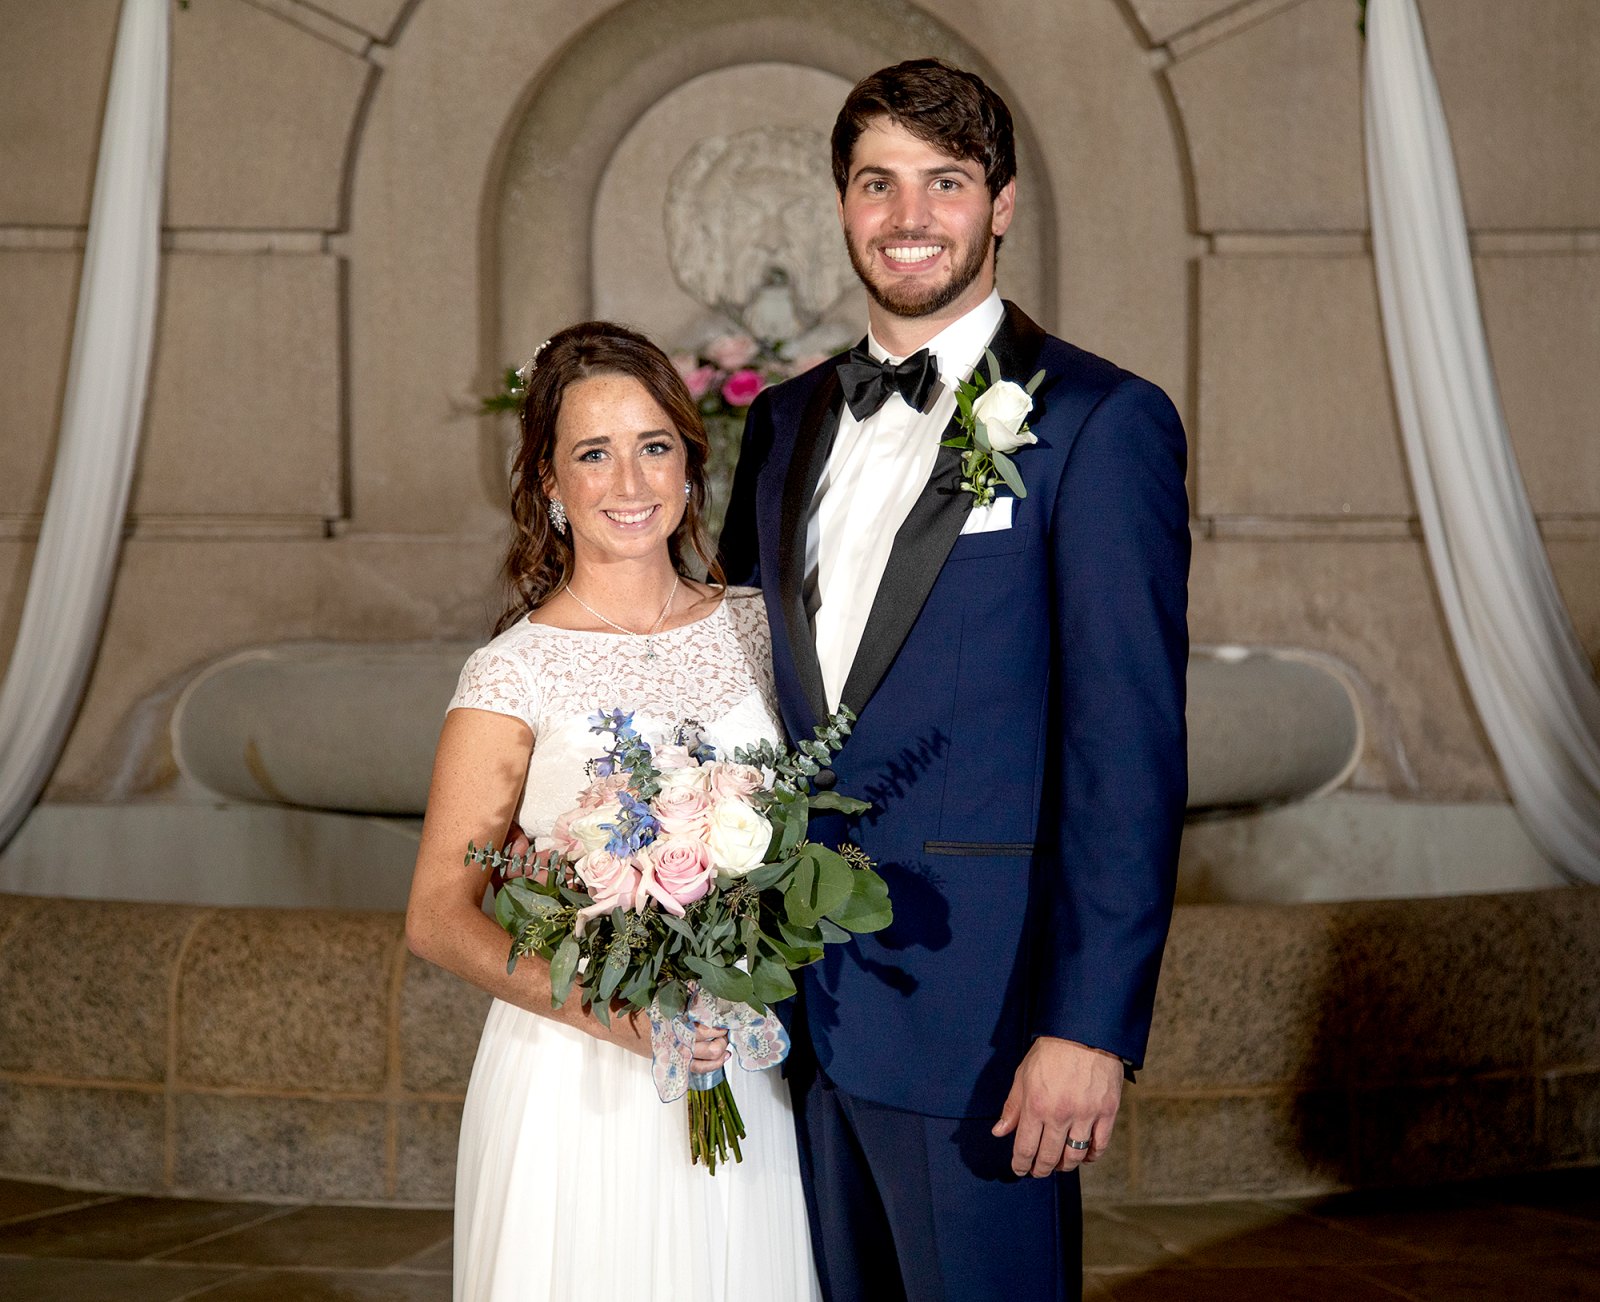 'Married at First Sight' Season 10: Meet the Couples